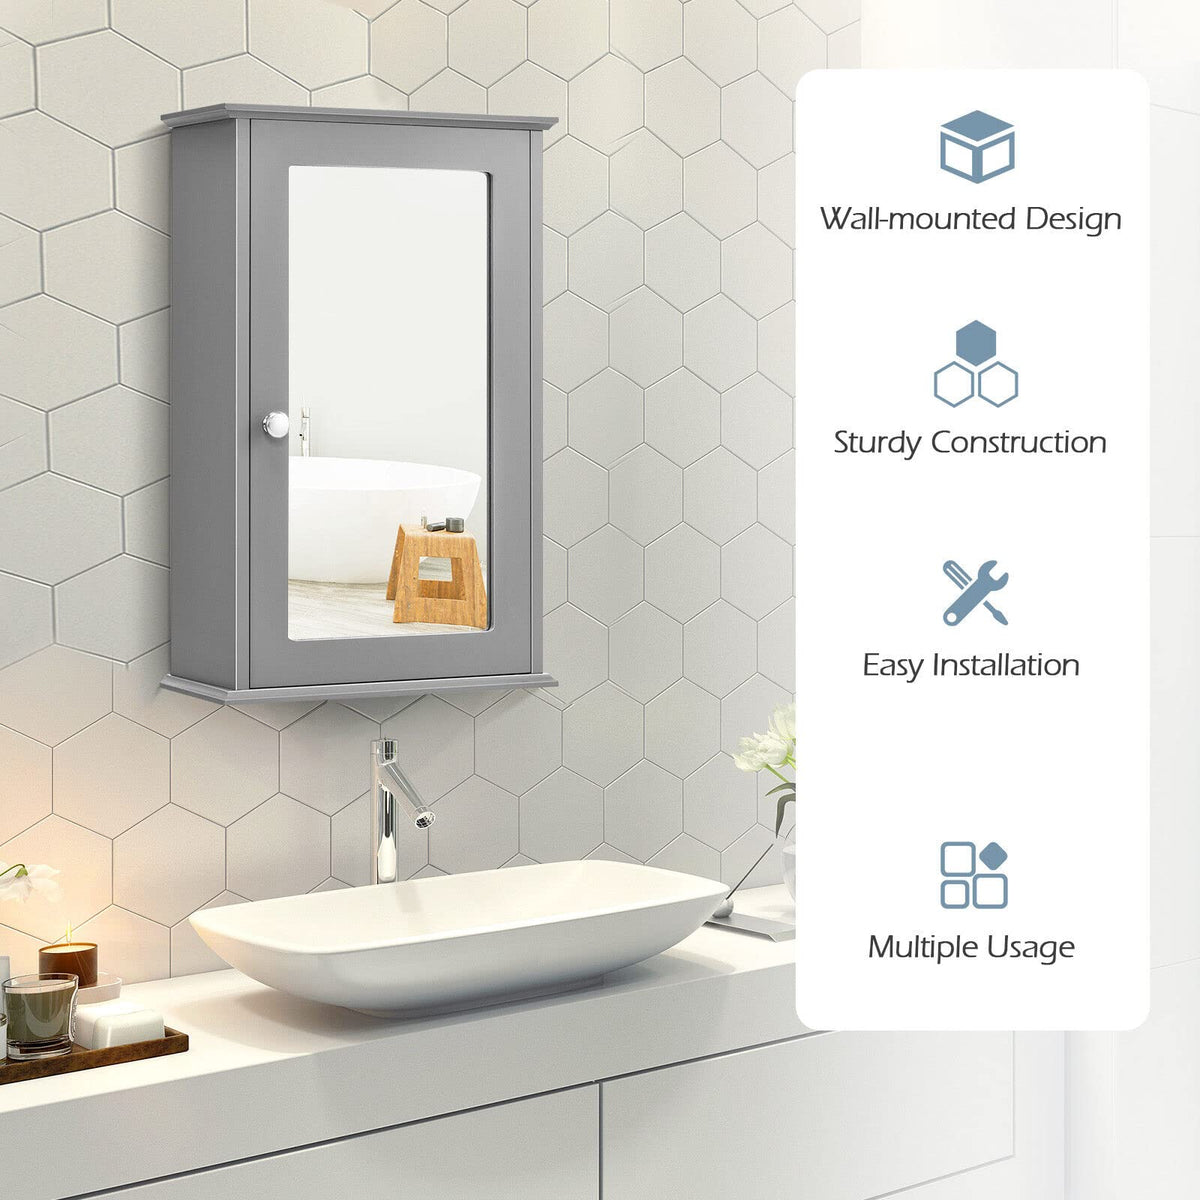 Giantex Wall Mounted Bathroom Cabinet, 2-in-1 Over The Sink Cabinet